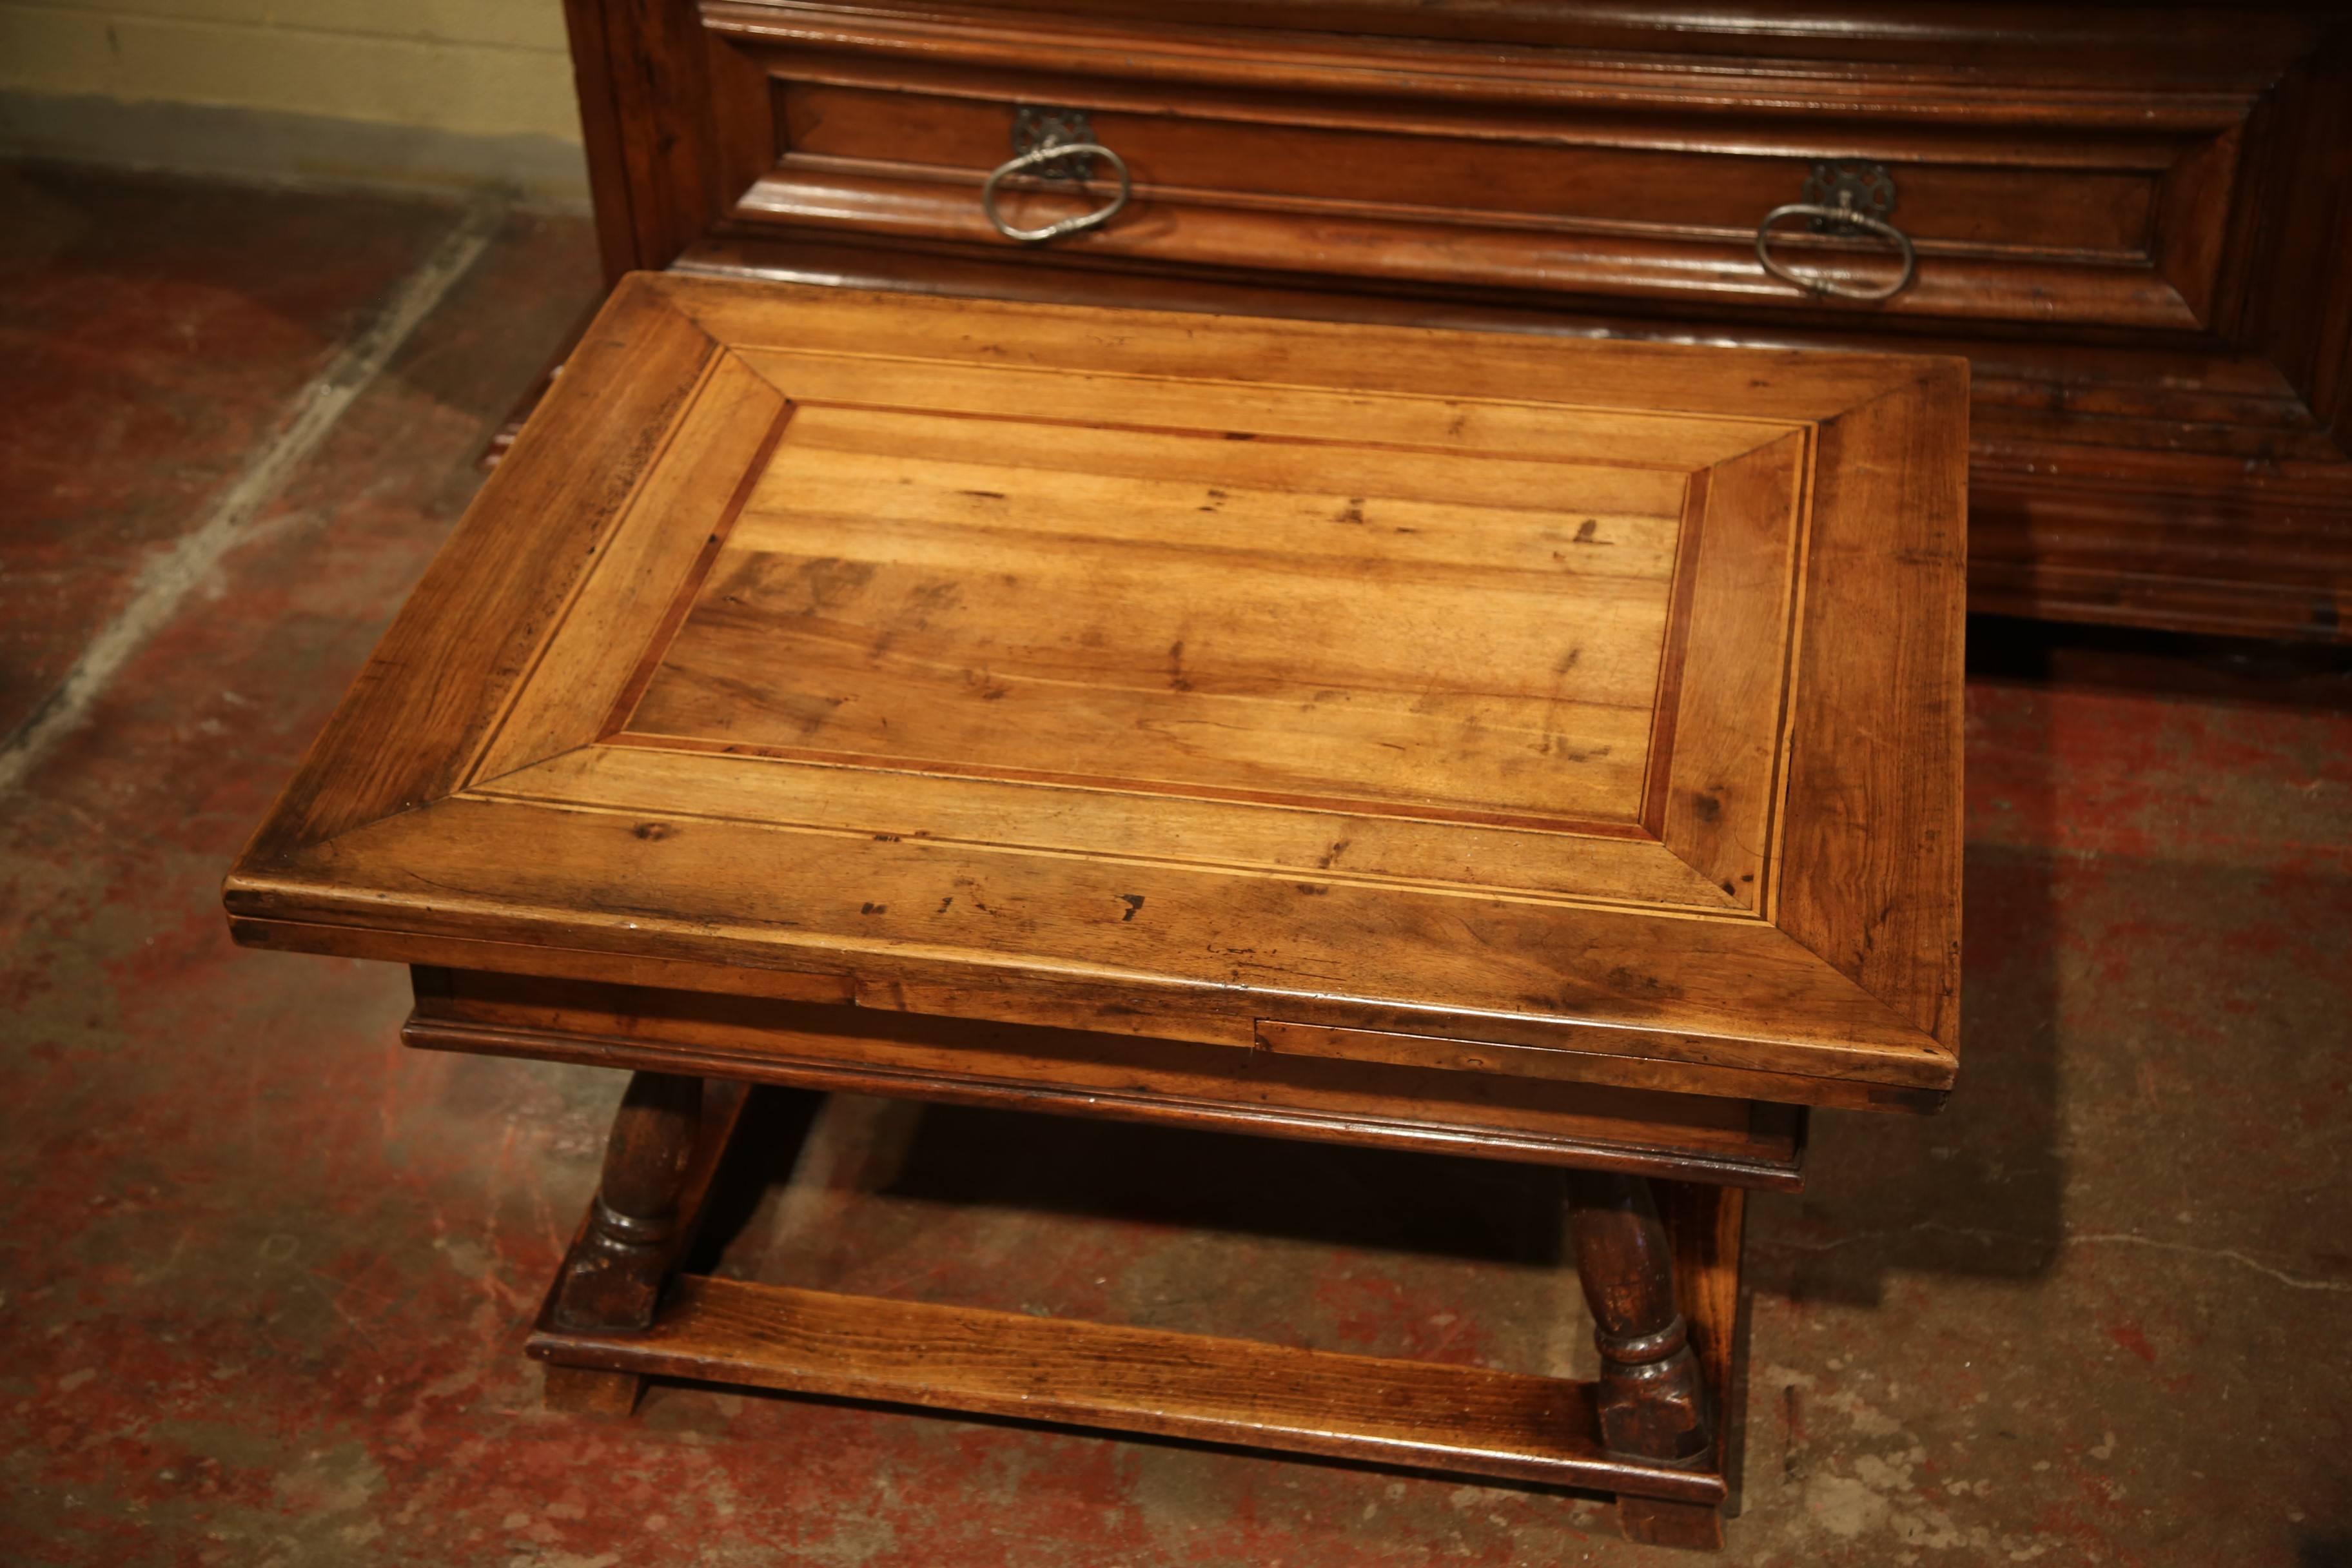 18th Century, French Walnut Coffee Table with Drawers and Pull-Out Leaves 1